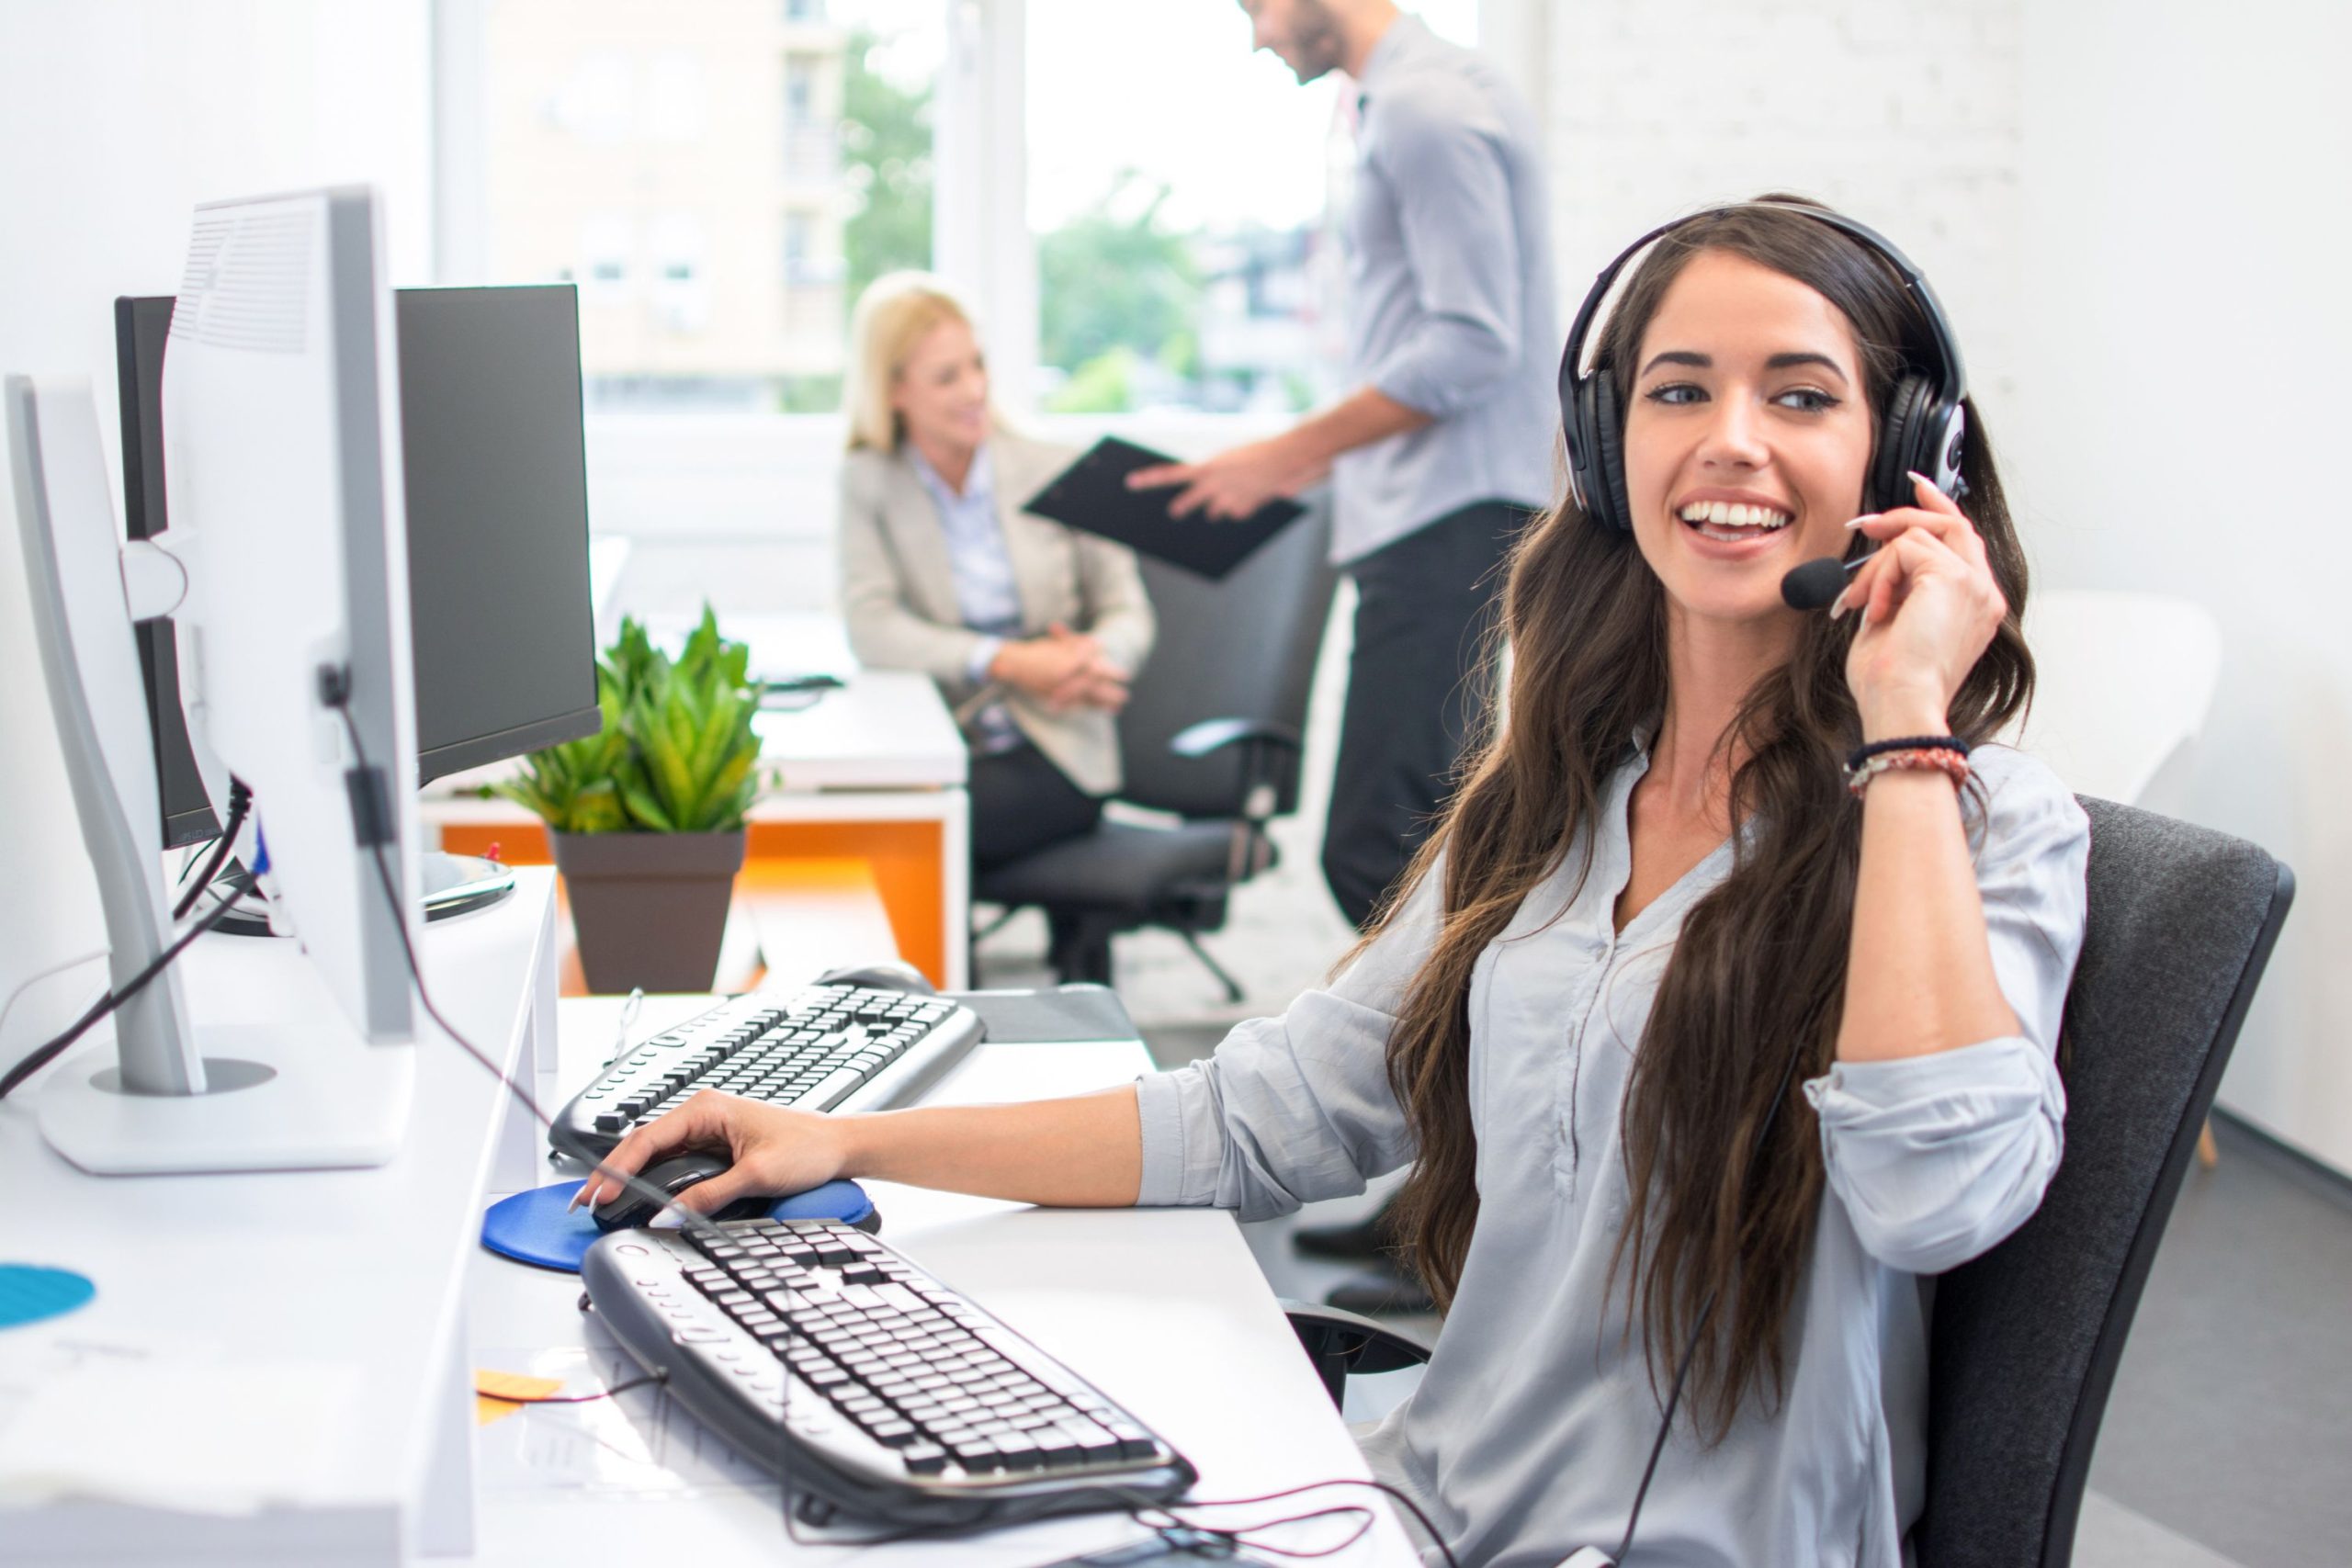 Young female office worker with headset on, smiling during a call